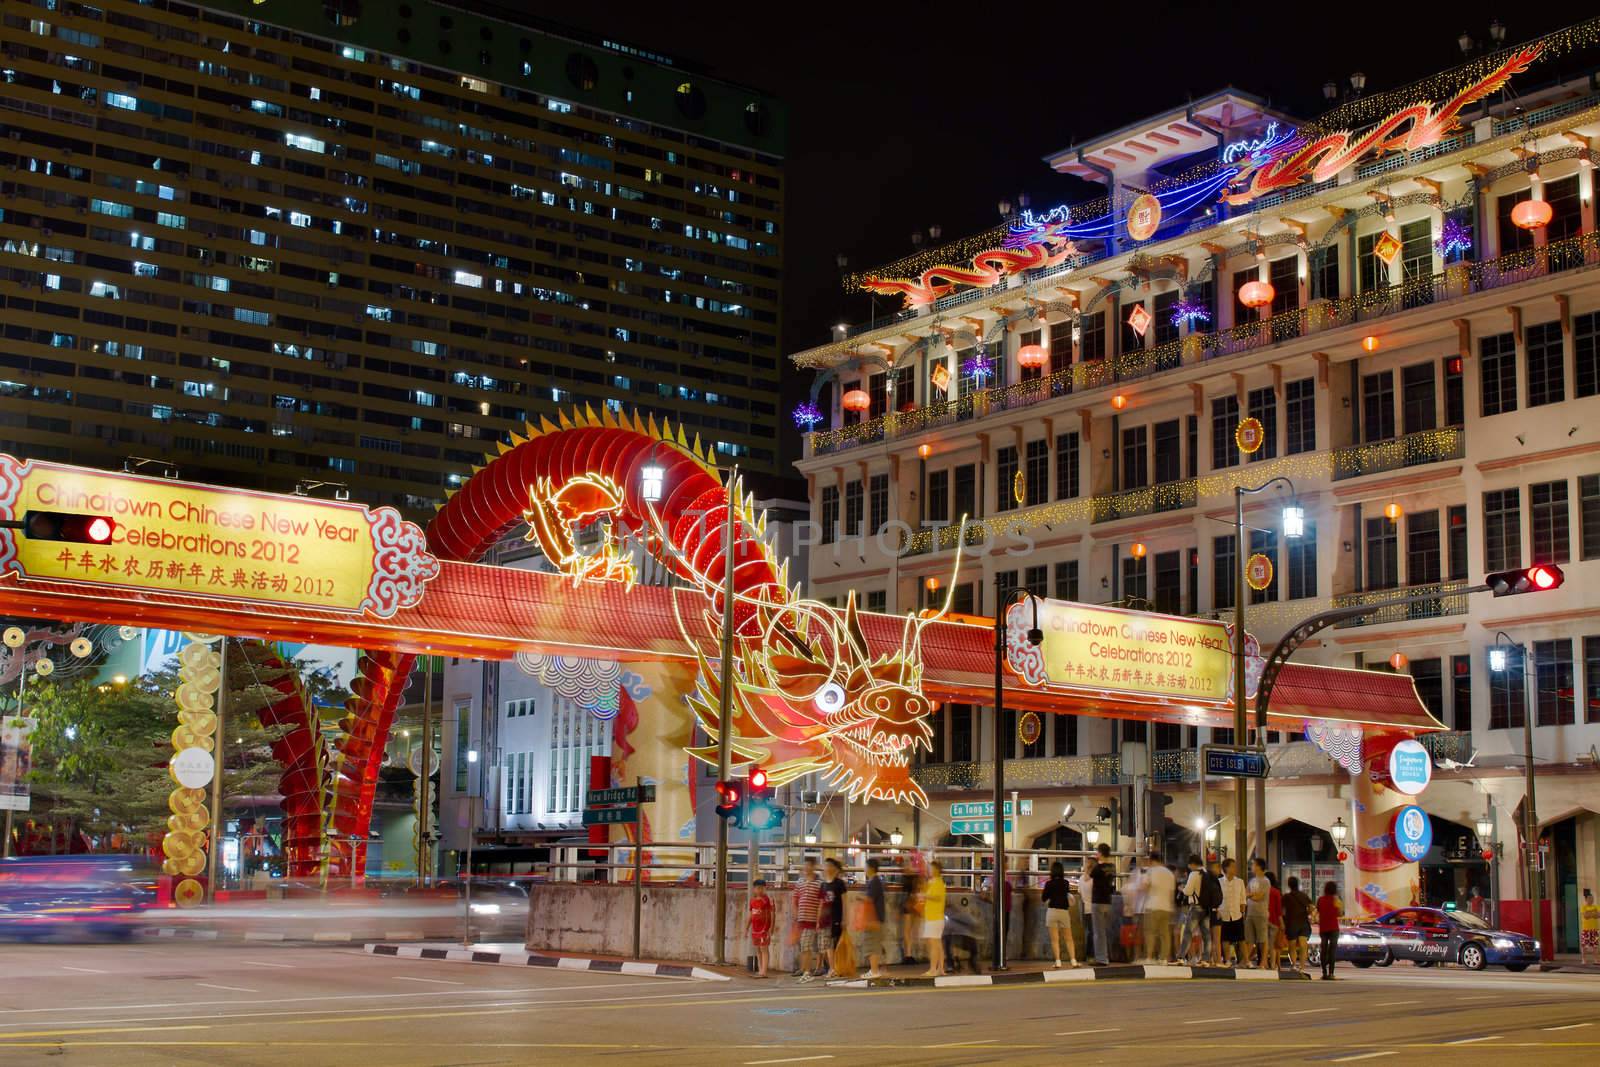 SINGAPORE - JANUARY 21: Chinese New Year Dragon Decoration along New Bridge Road in Singapore Chinatown on January 11, 2012. Designed by Singapore University of Technology and Design (SUTD). 